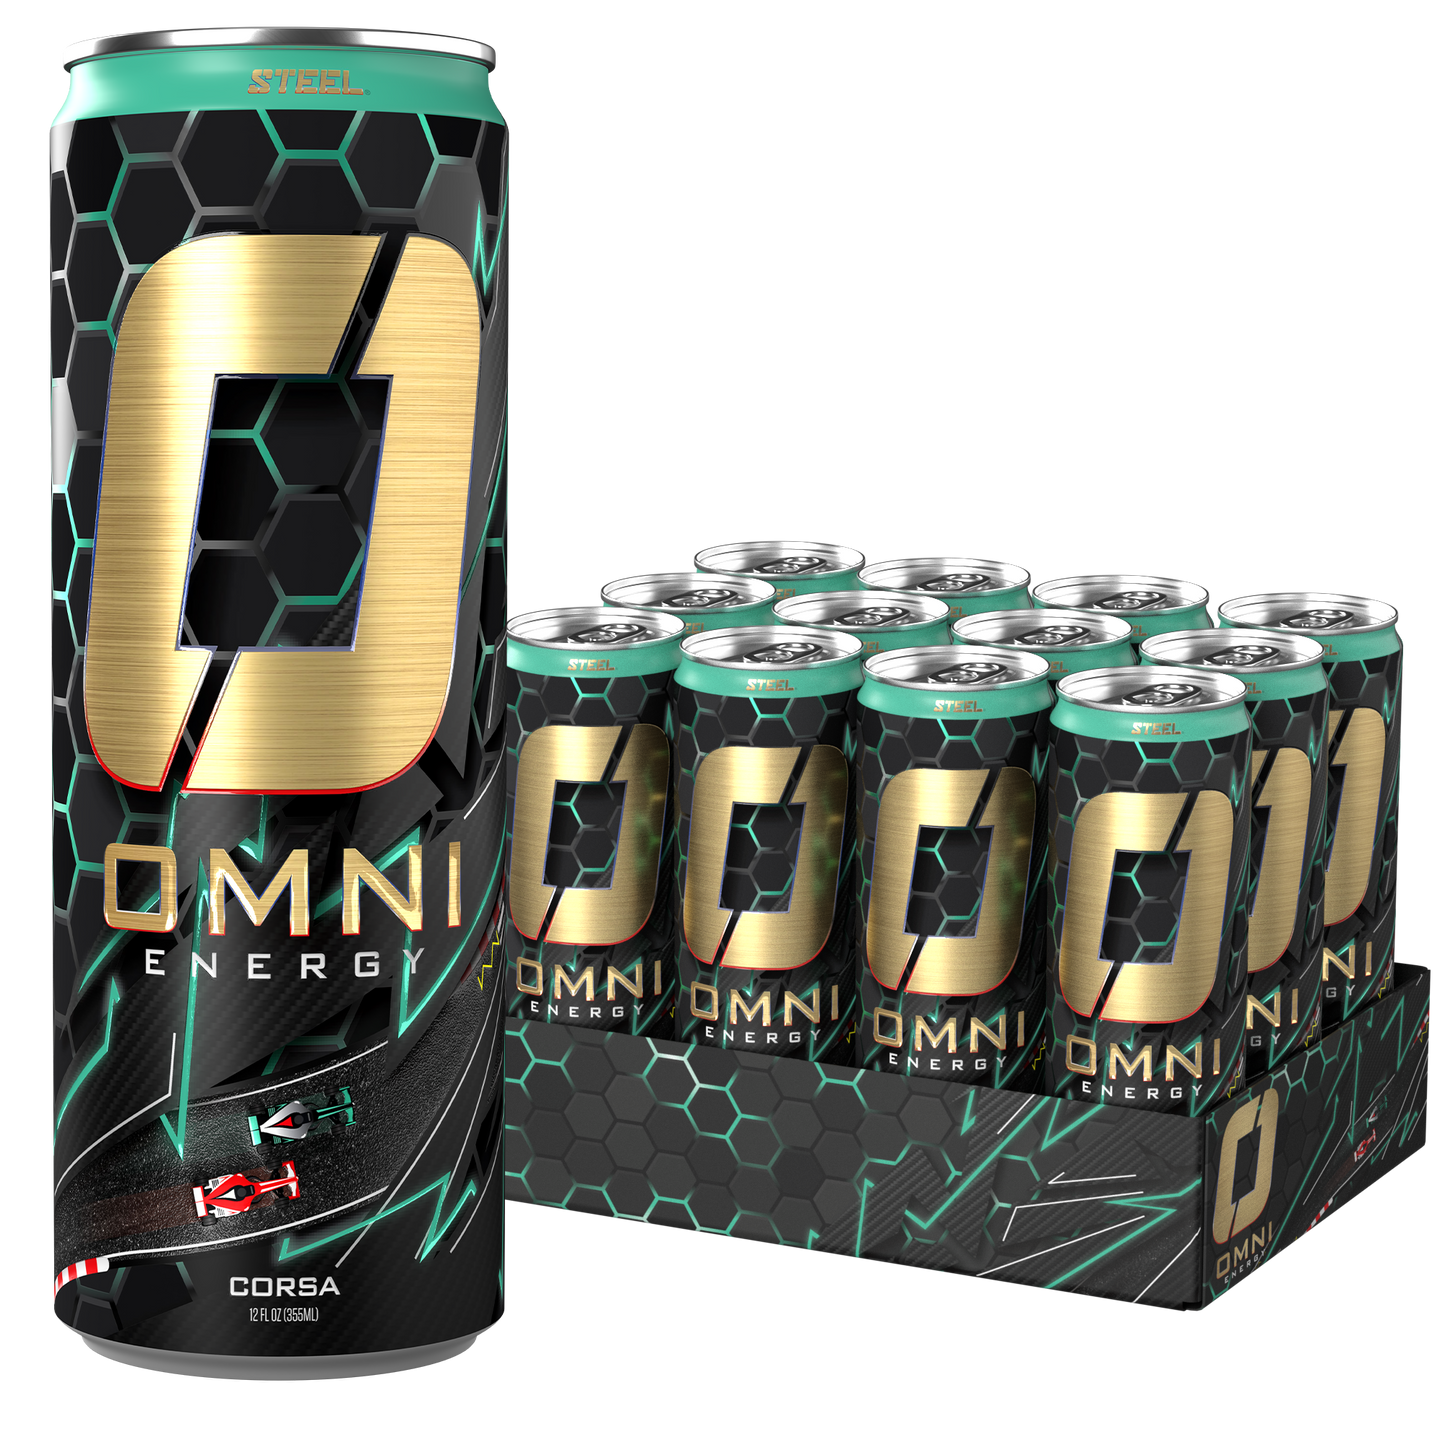 Corsa - Case of 12 Cans